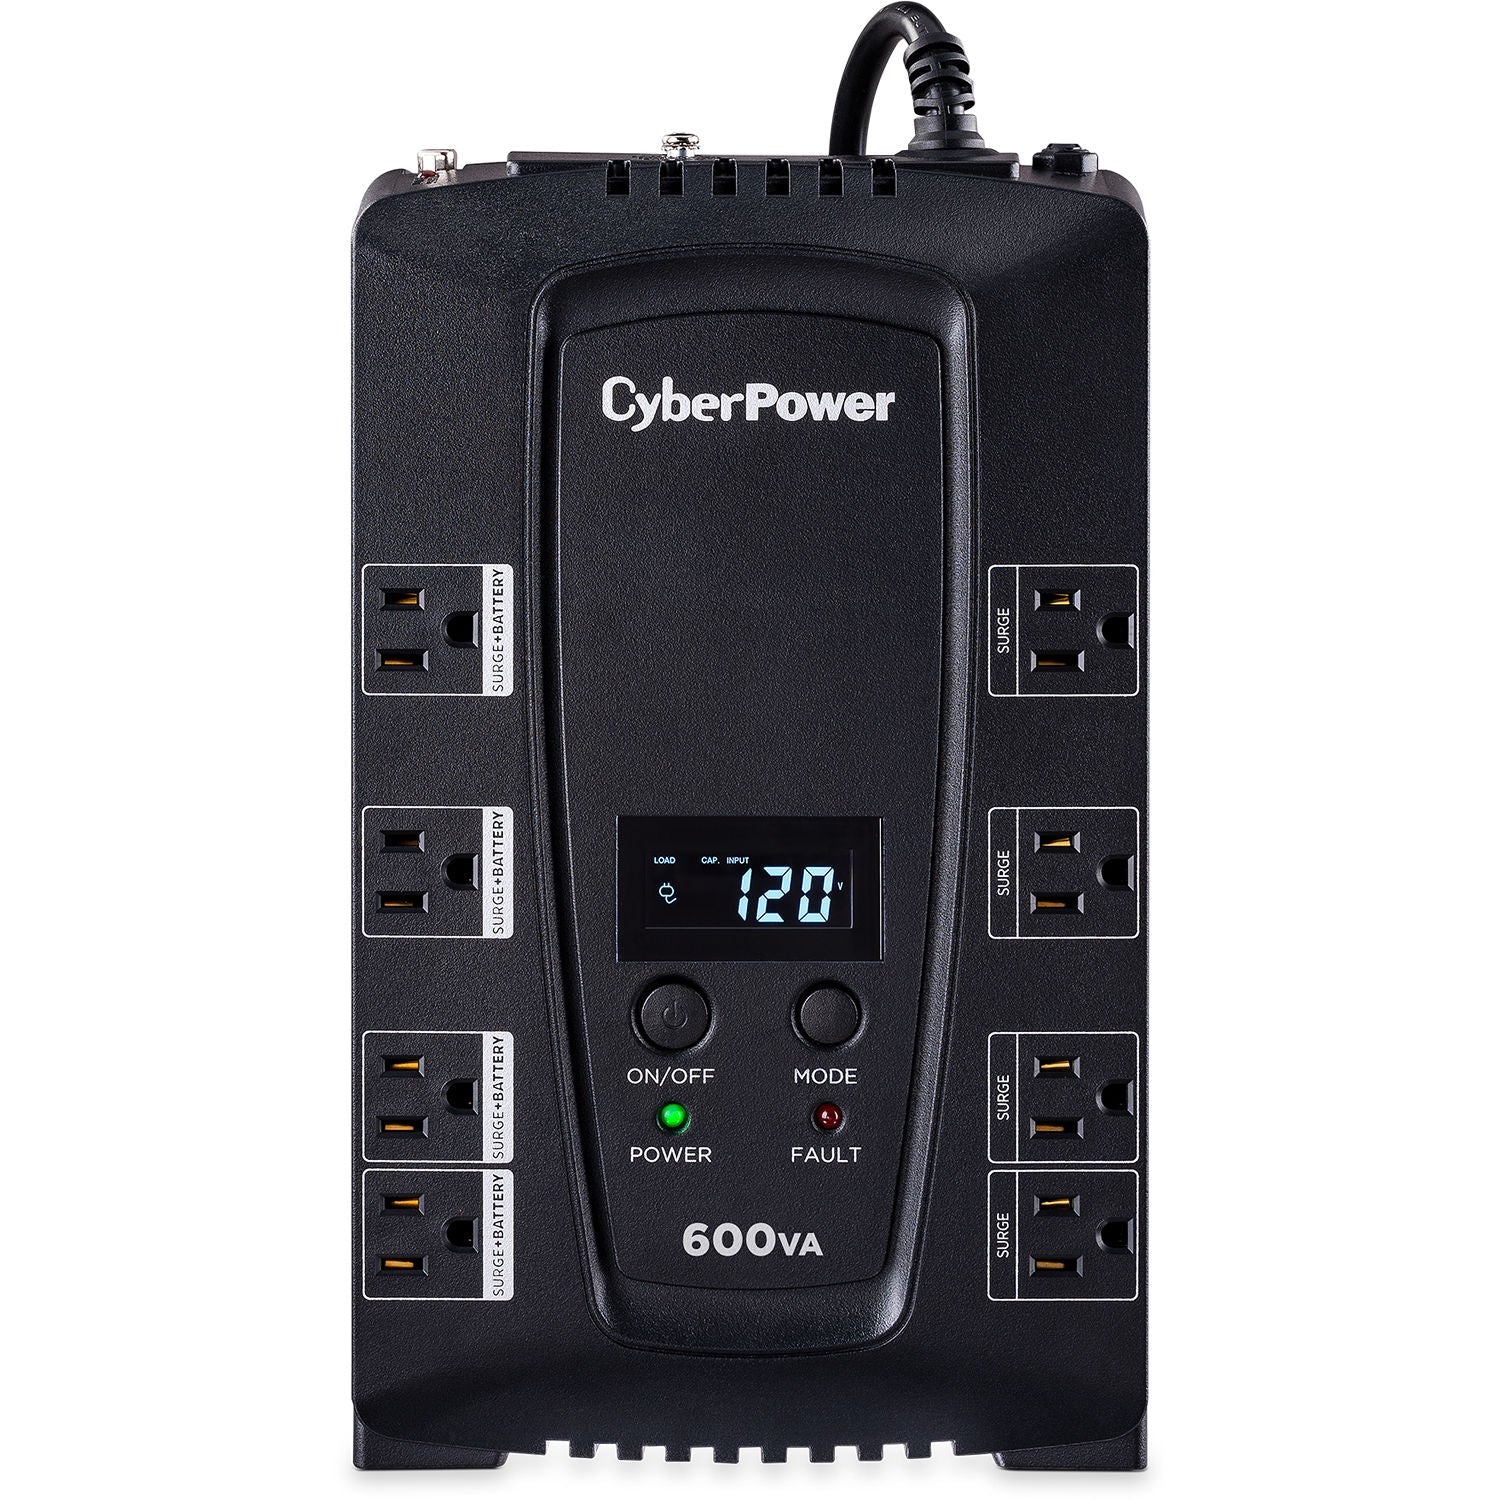 CyberPower CP600LCD-R 600VA/340W Intelligent LCD UPS System - New Battery Certified Refurbished